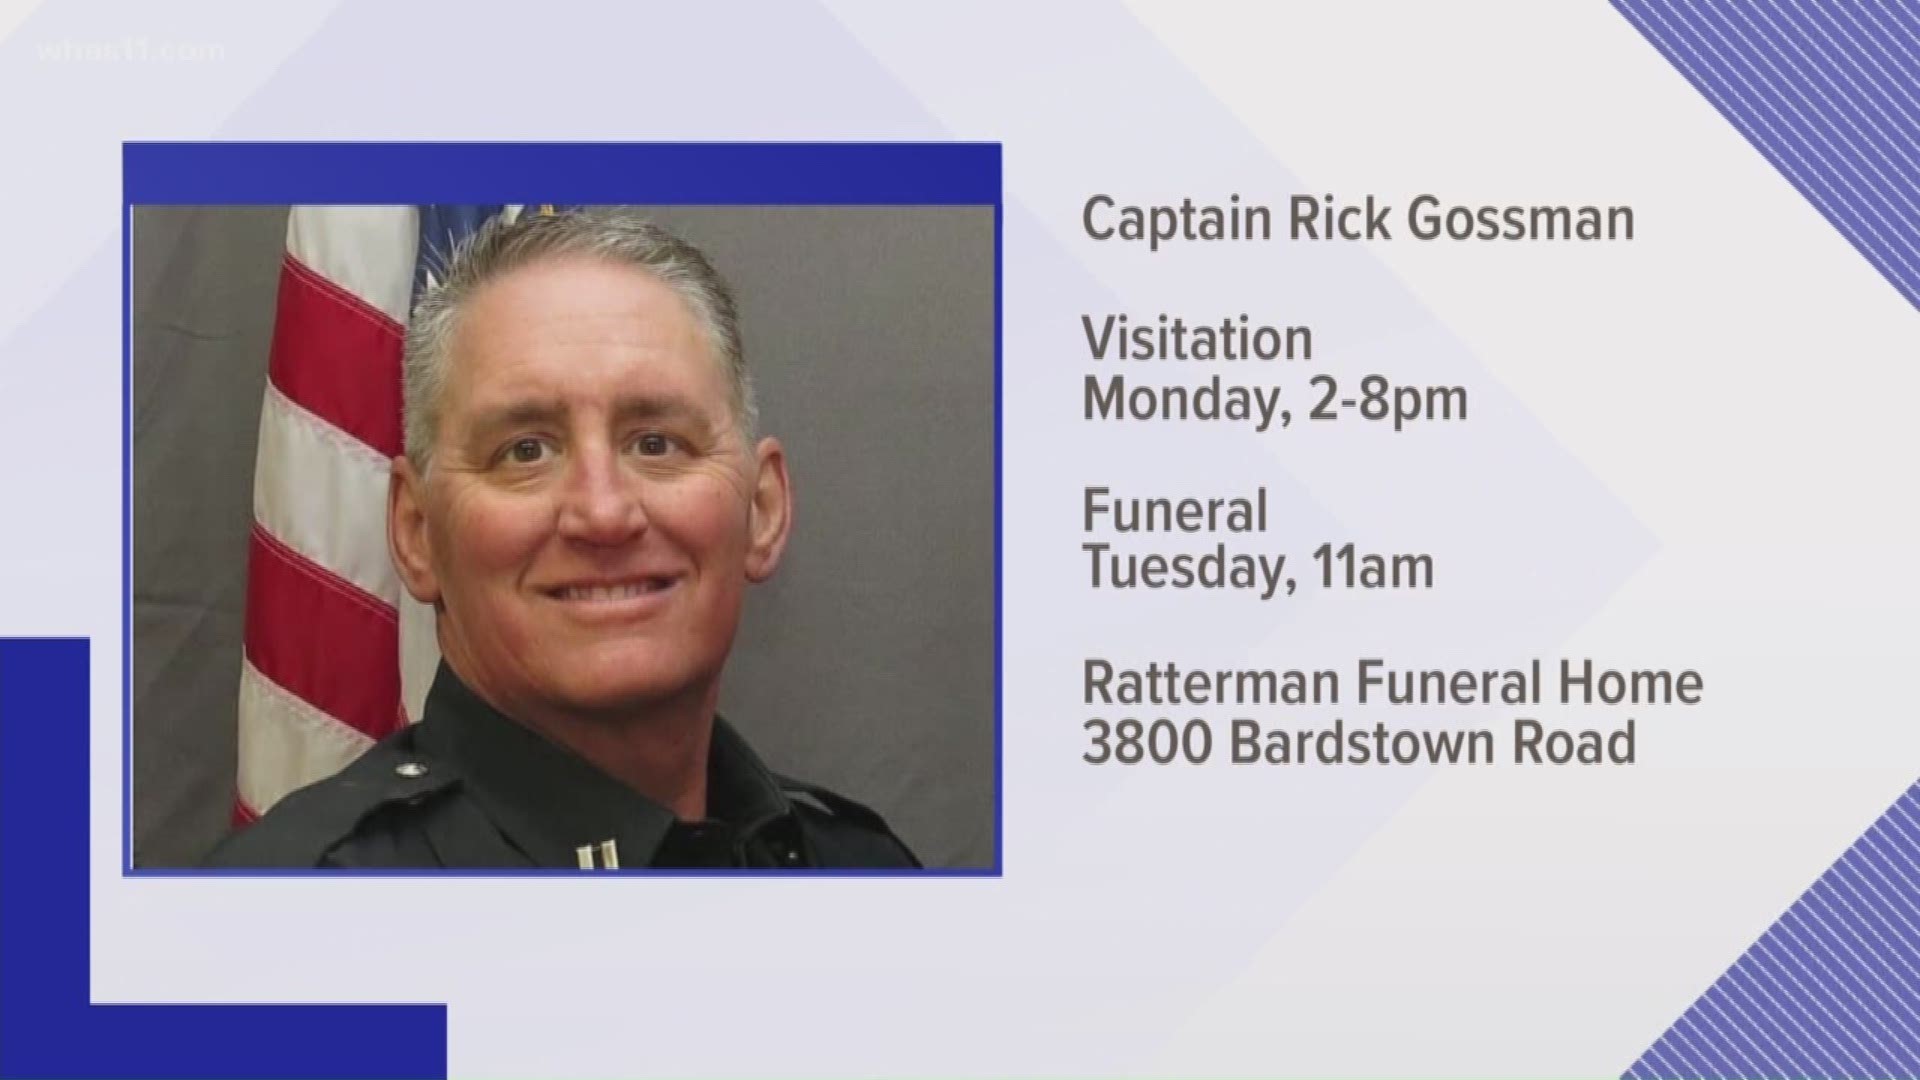 Officials say Gossman died from cancer Saturday.